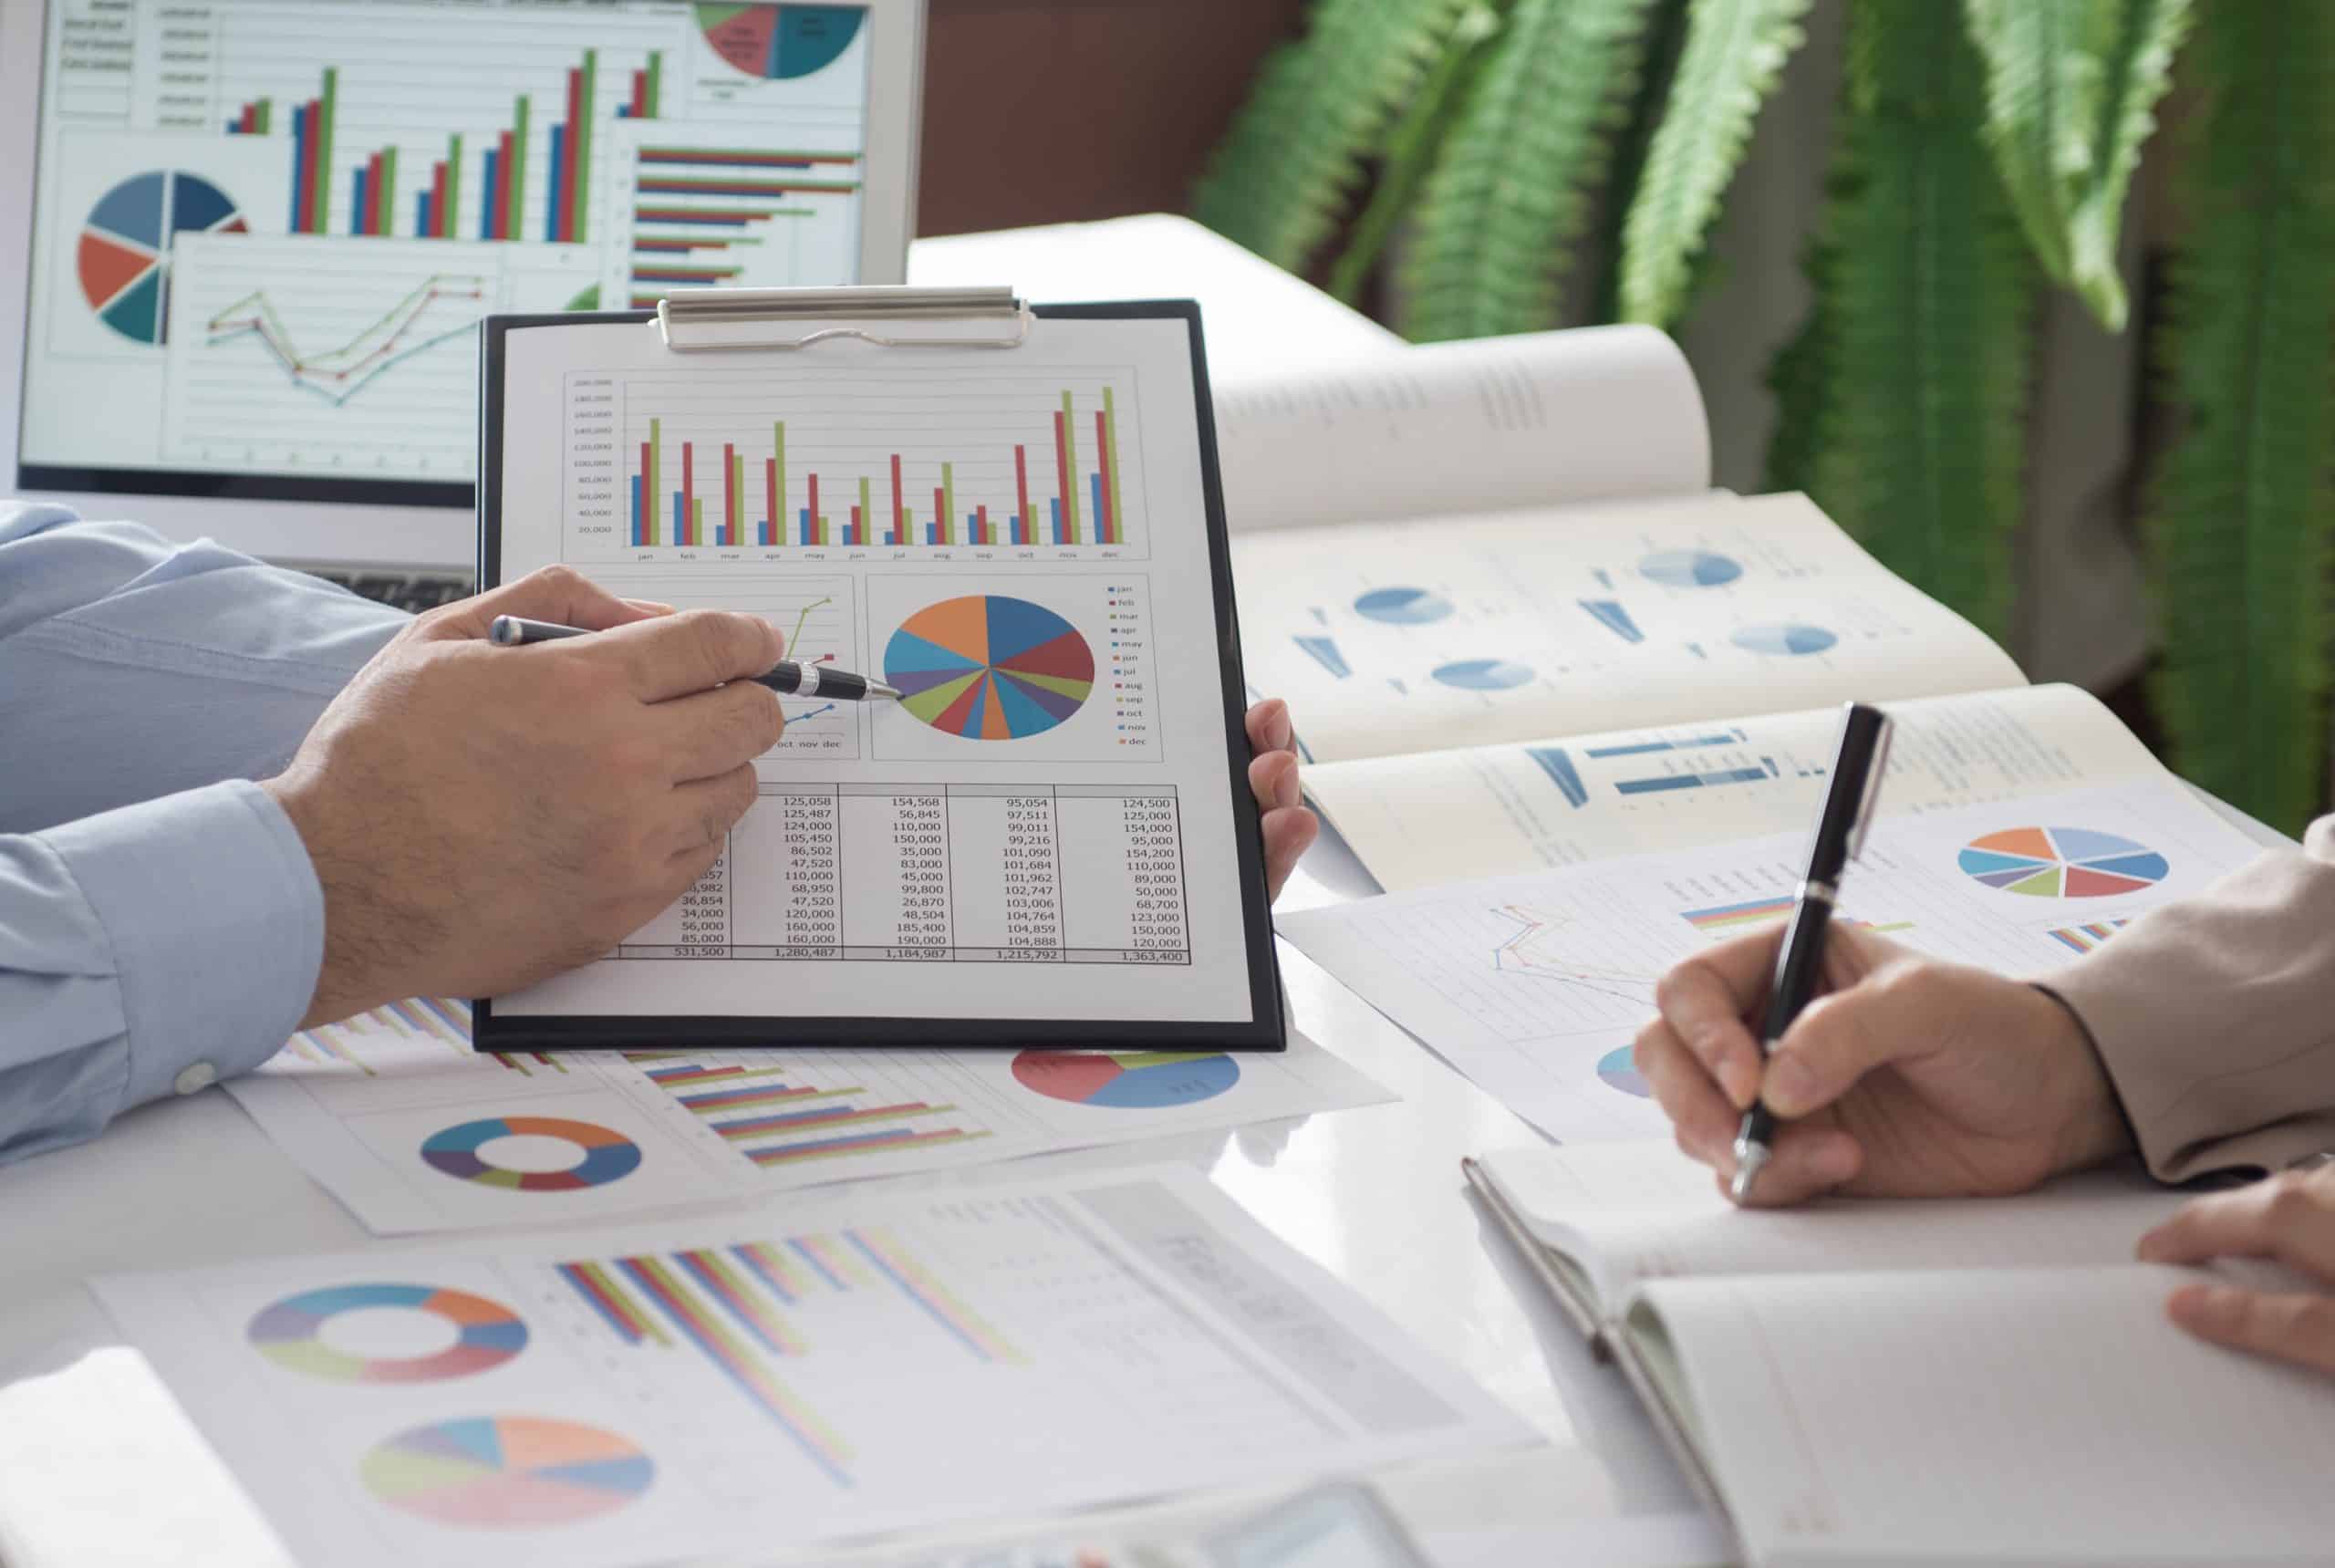 business people presentation data of financial or marketing figures, graphs and charts for reviewing market data and business strategy plan.